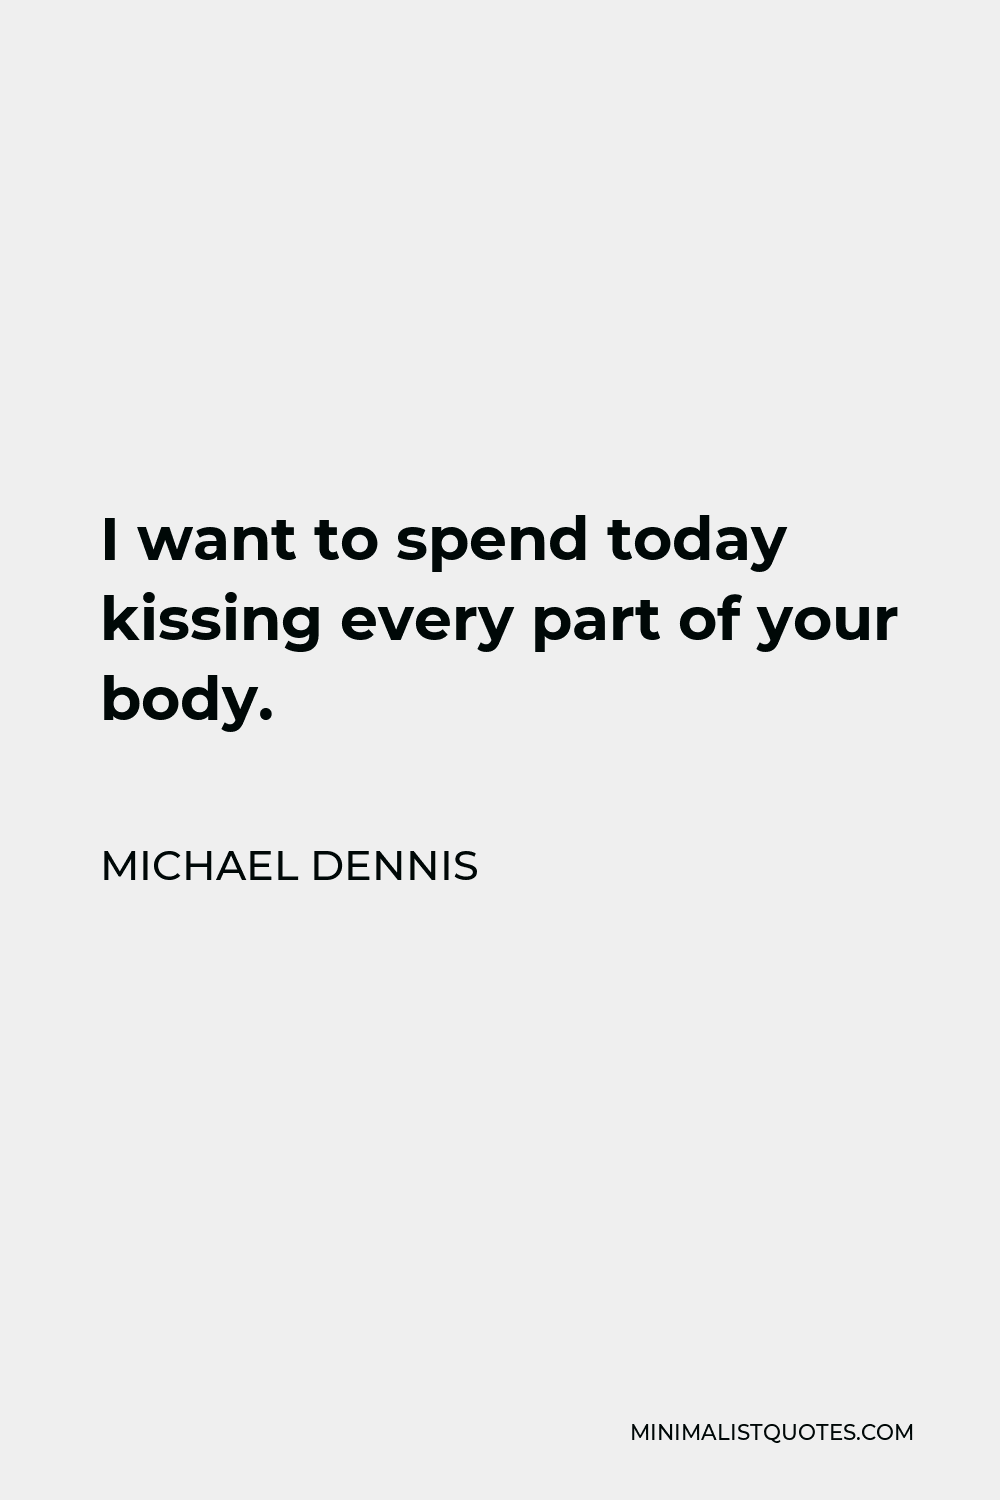 Michael Dennis Quote - I want to spend today kissing every part of your body.